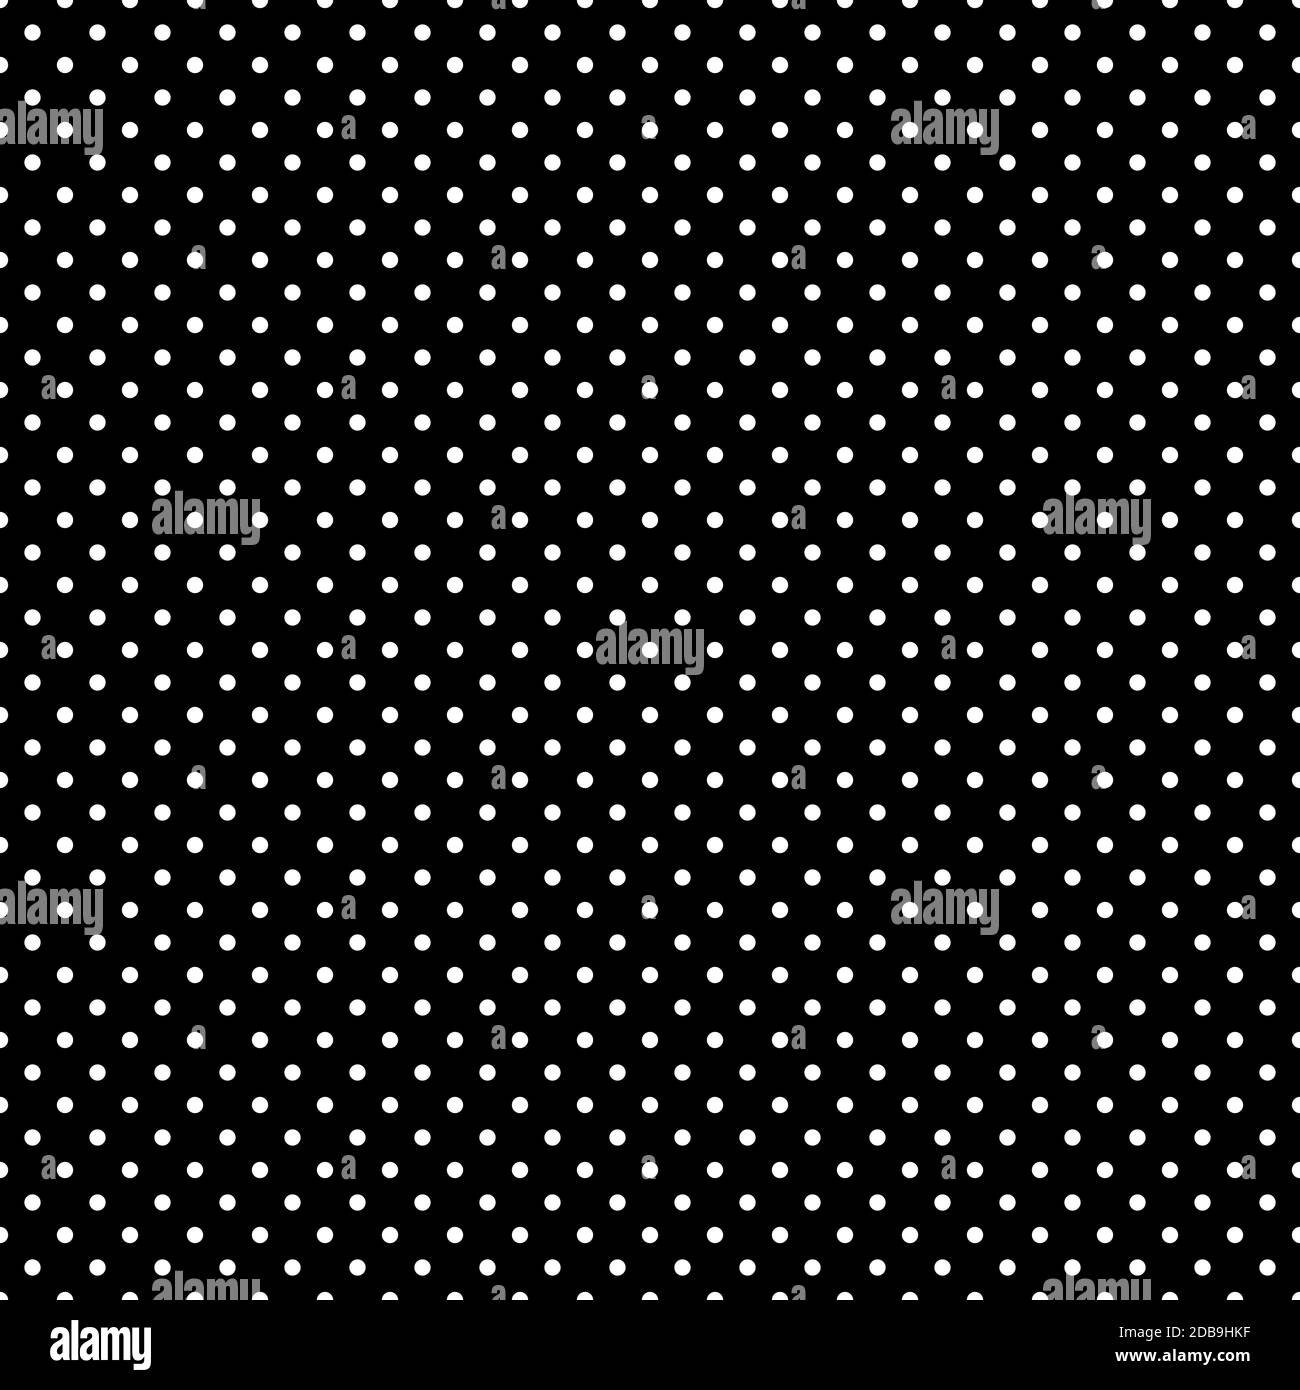 Black And White Polka Dot Seamless Pattern Background Isolated On White Eps 10 Vector File 2193